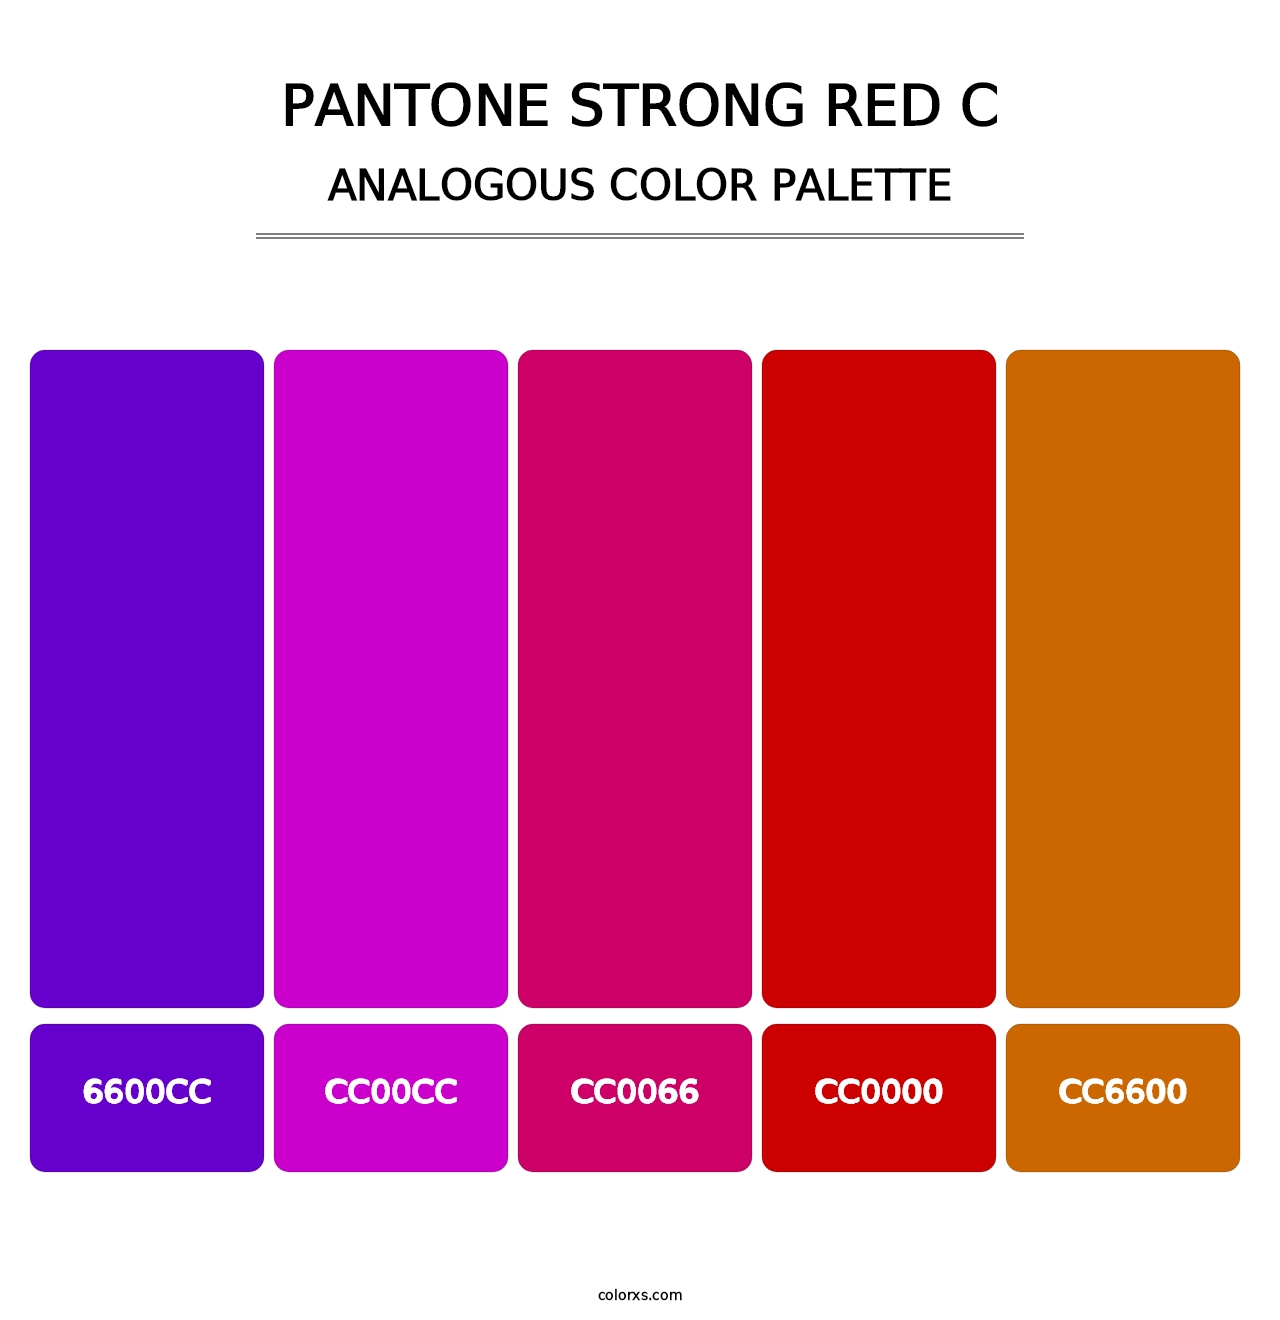 PANTONE Strong Red C - Analogous Color Palette